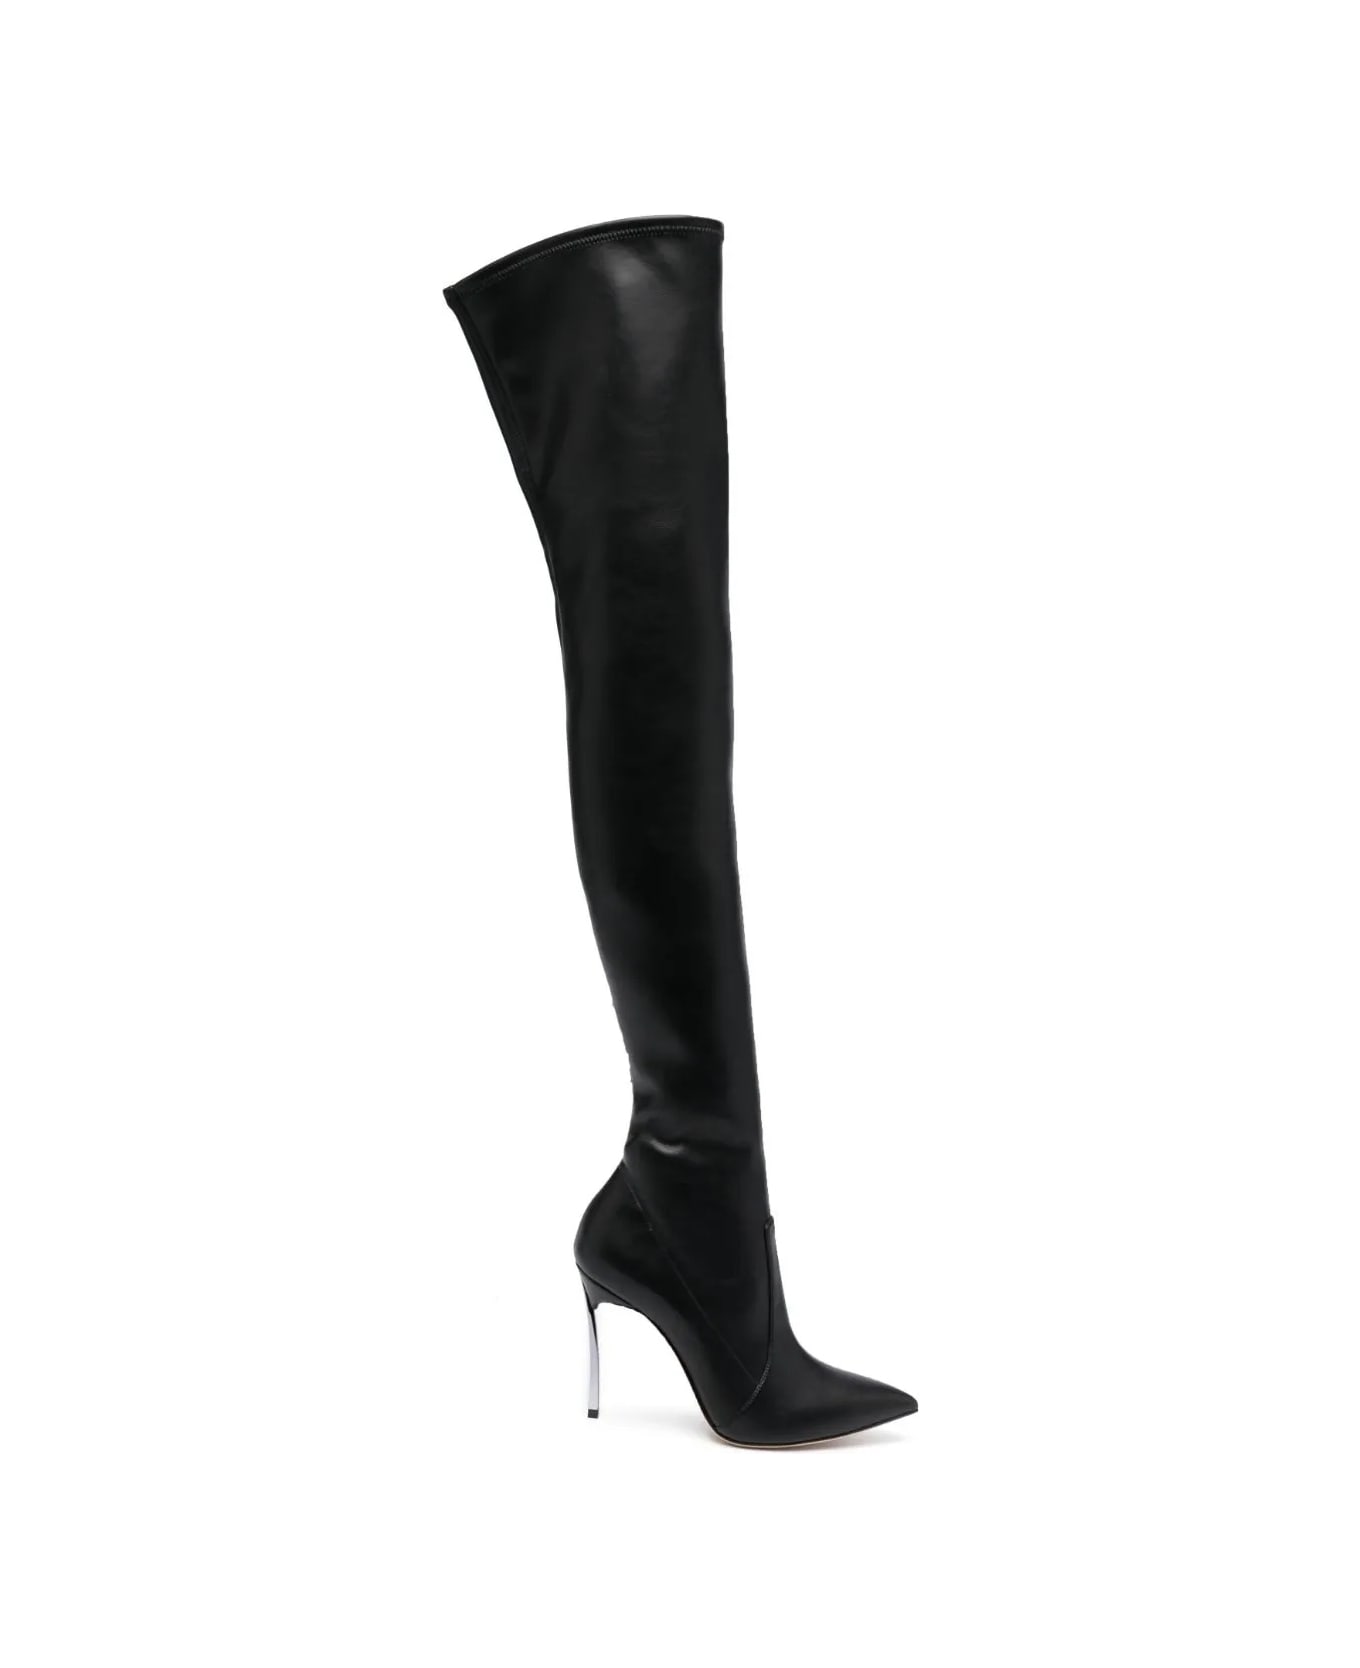 Casadei Black Blade Eco Leather Over The Knee Boots | italist, ALWAYS ...